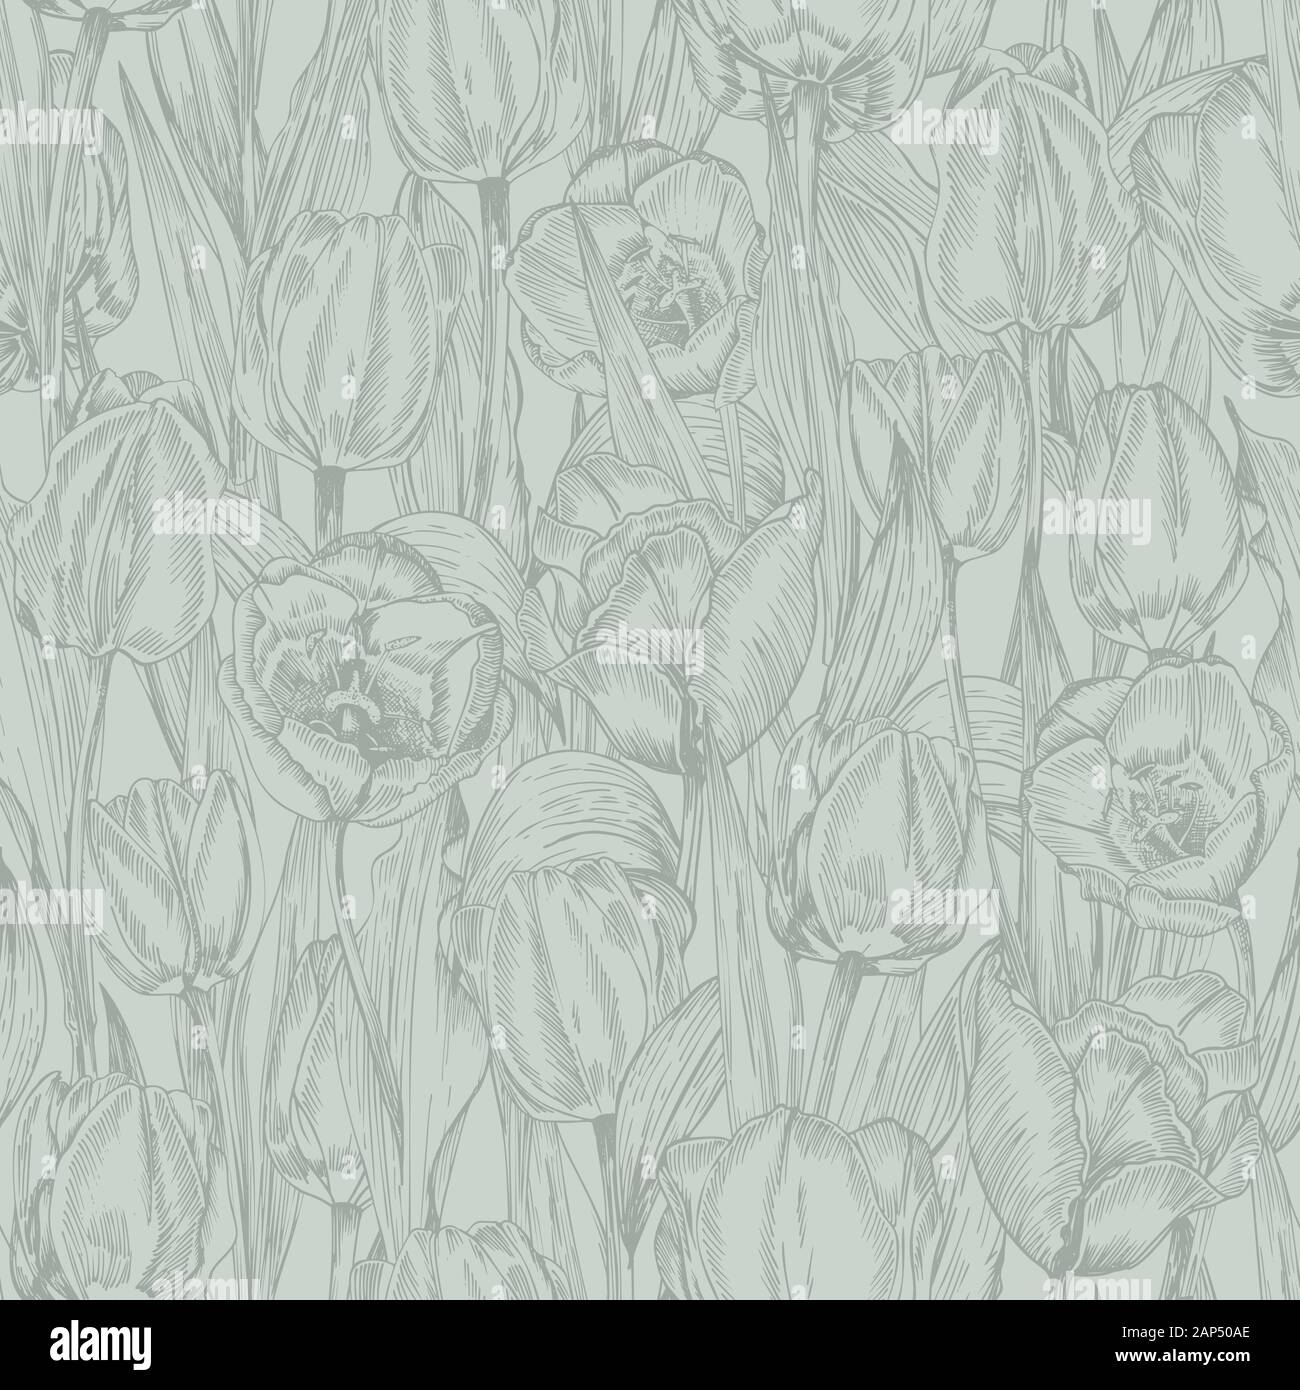 Greeting seamless with Spring flower tulips bouquet in gray green colors on blue background. Engraving drawing Vintage style Stock Vector